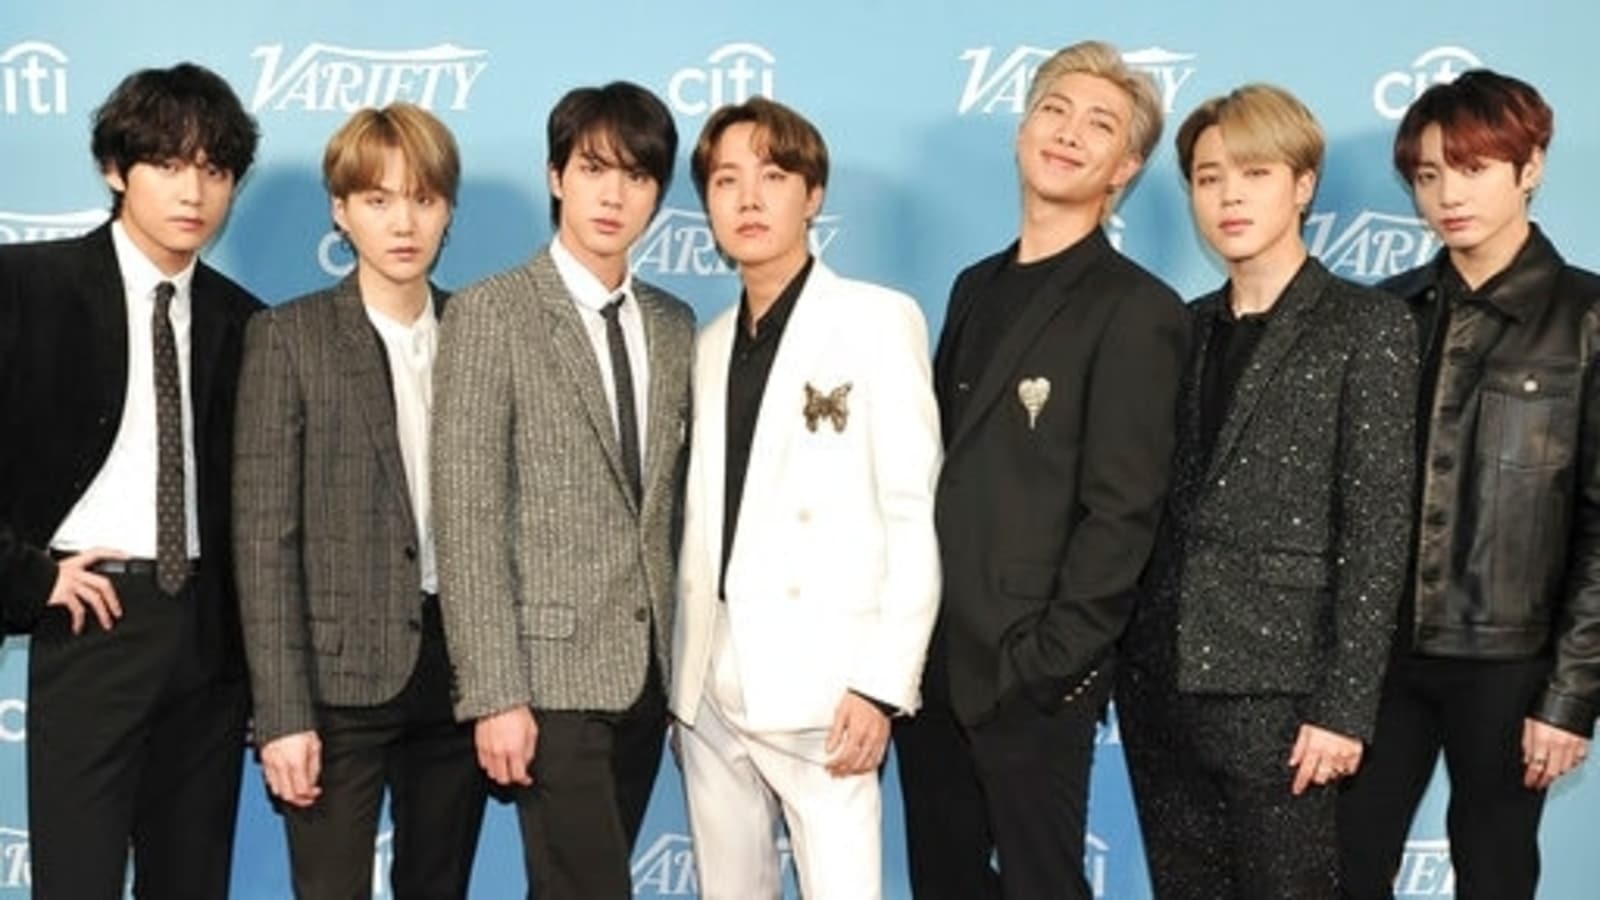 BTS faces possible military conscription as South Korean official says it’s ‘desirable’ for group to fulfil duties